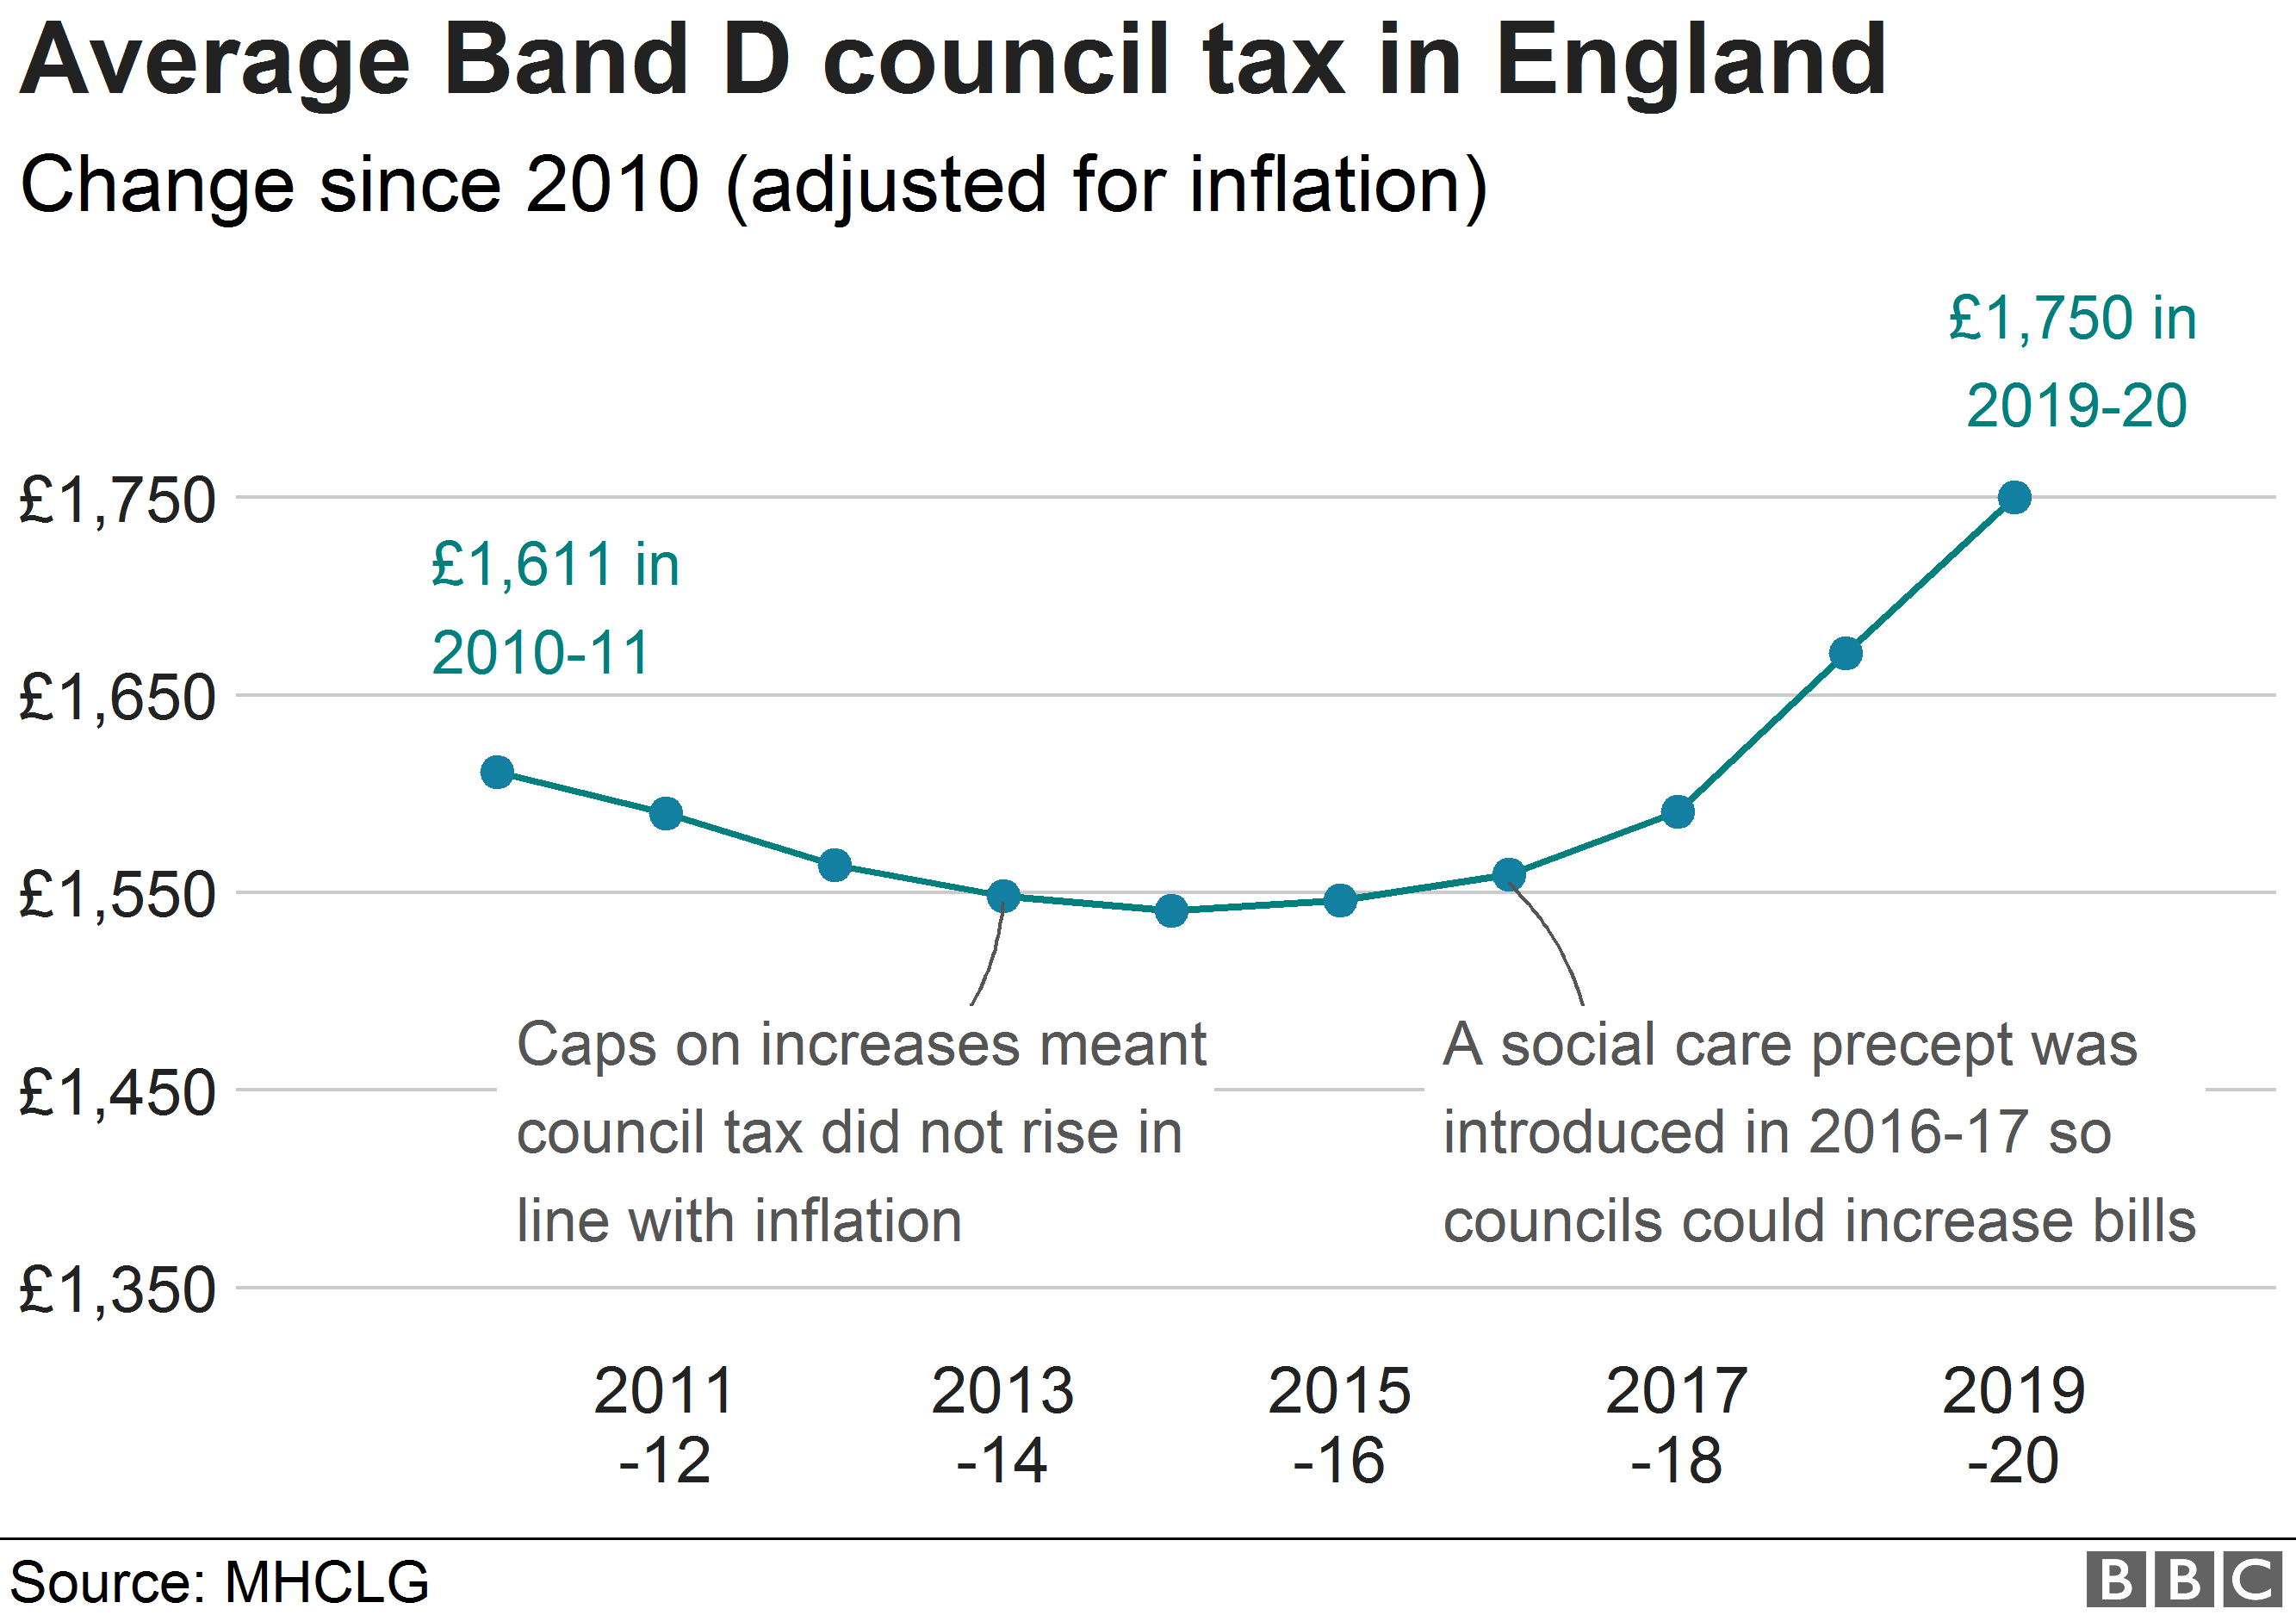 Council tax change over time for average Band D